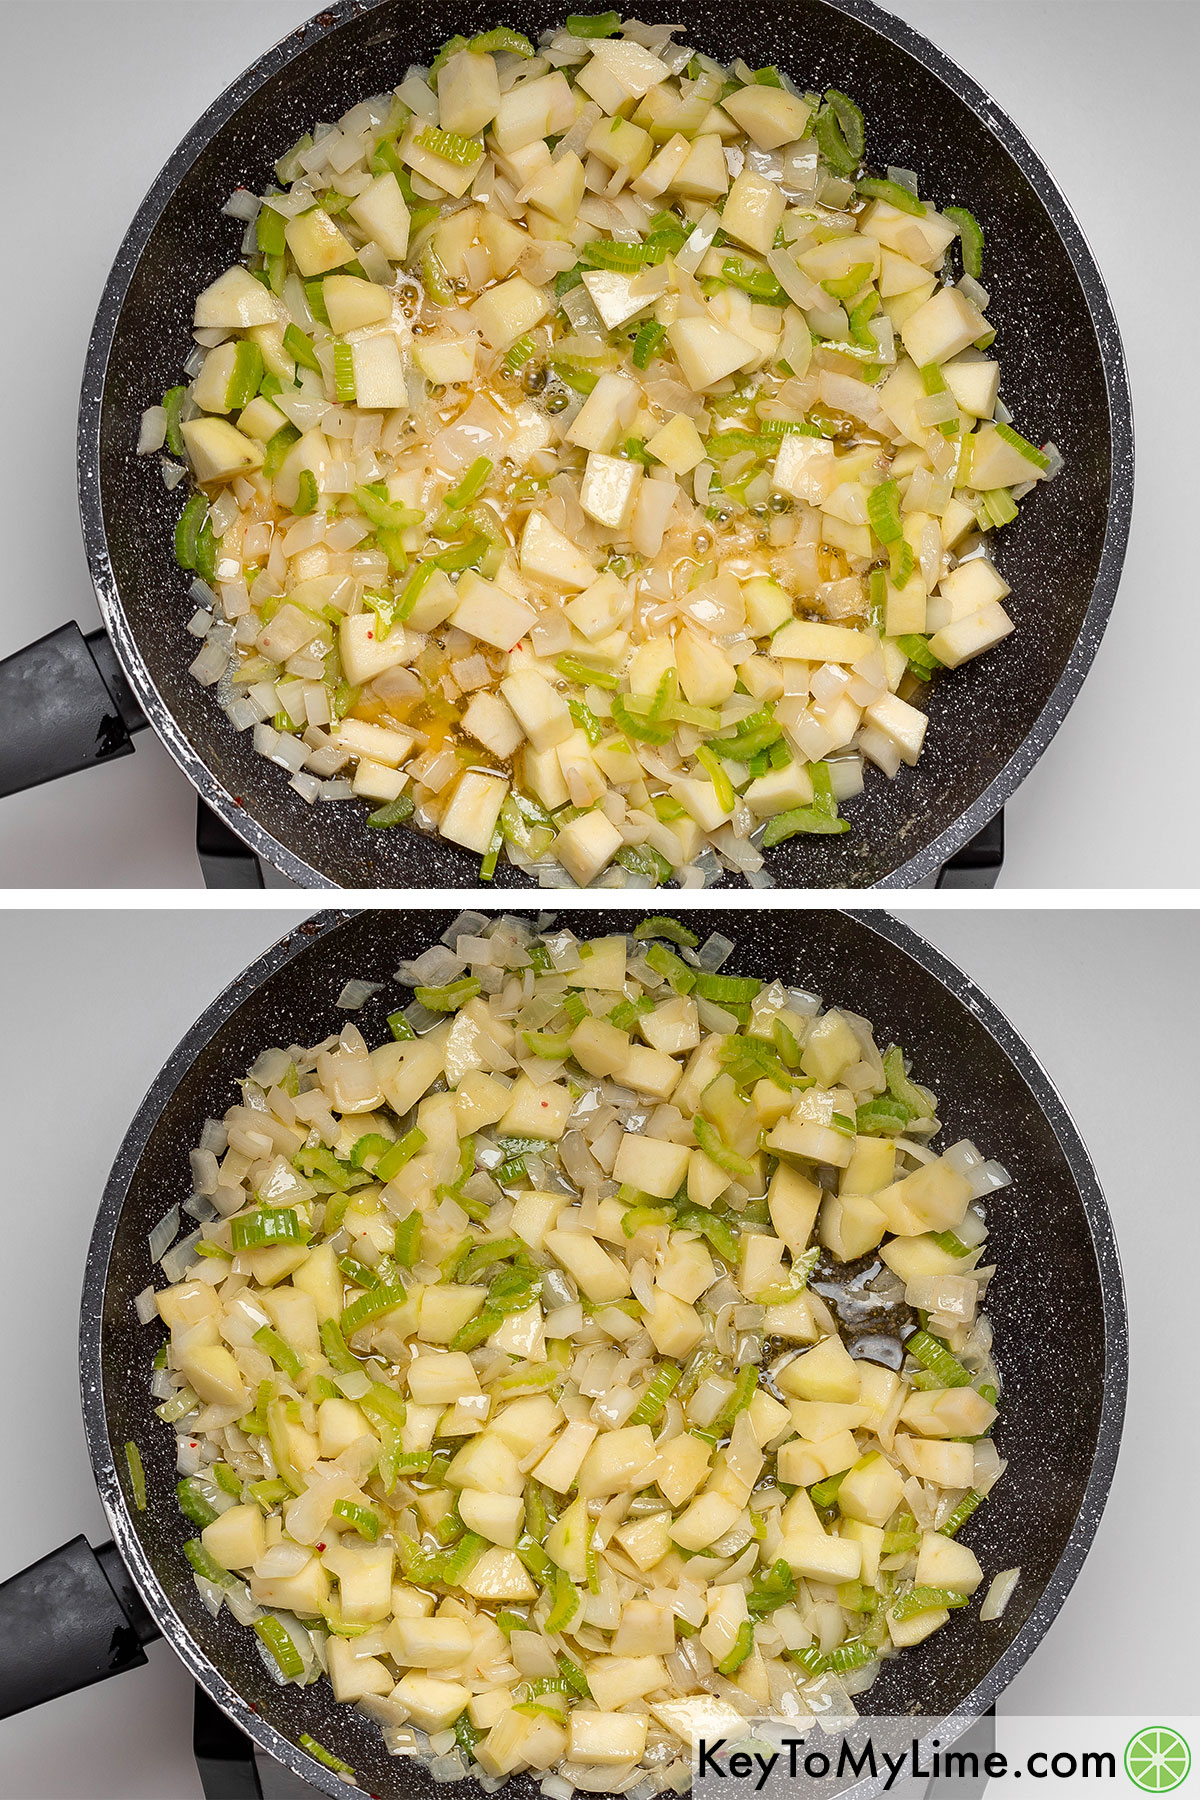 Sauteing the vegetables then adding in cubed apples and cooking for another two minutes.